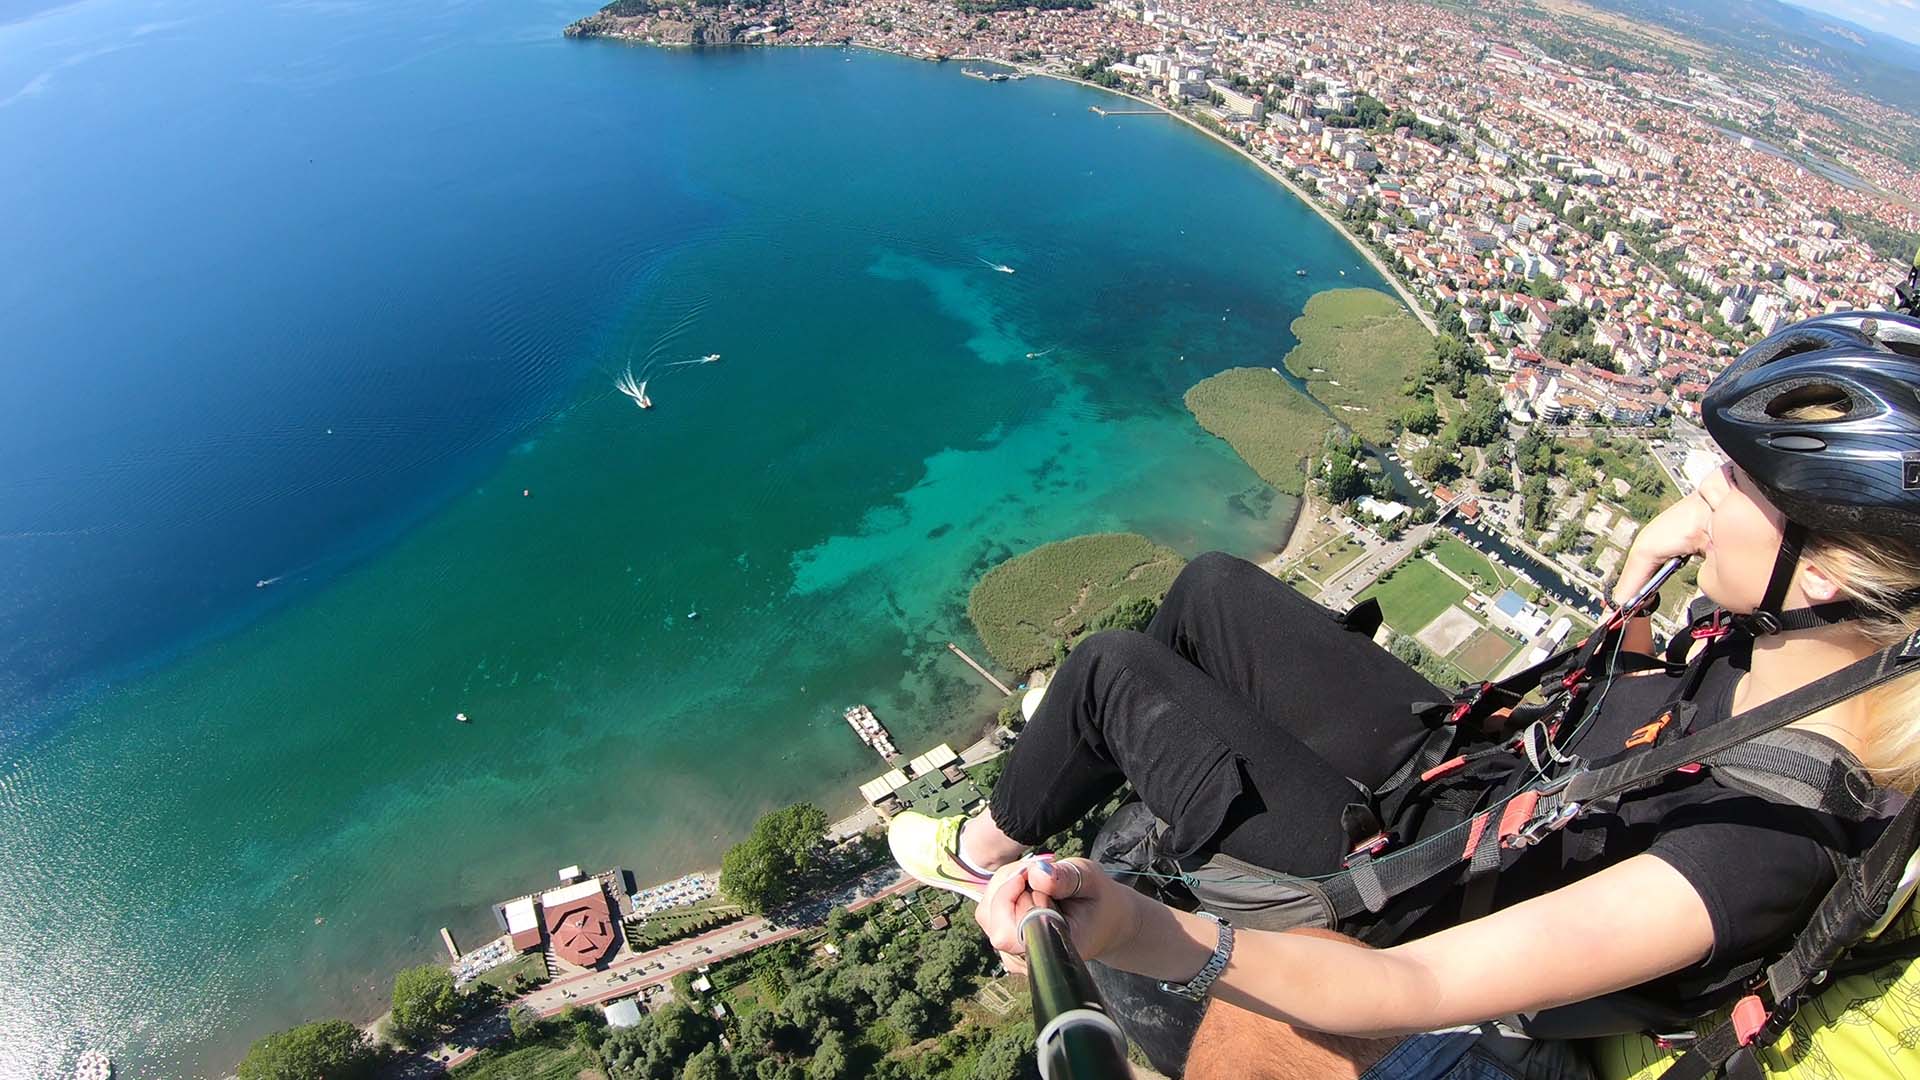 Paragliding above Ohrid city and Lake